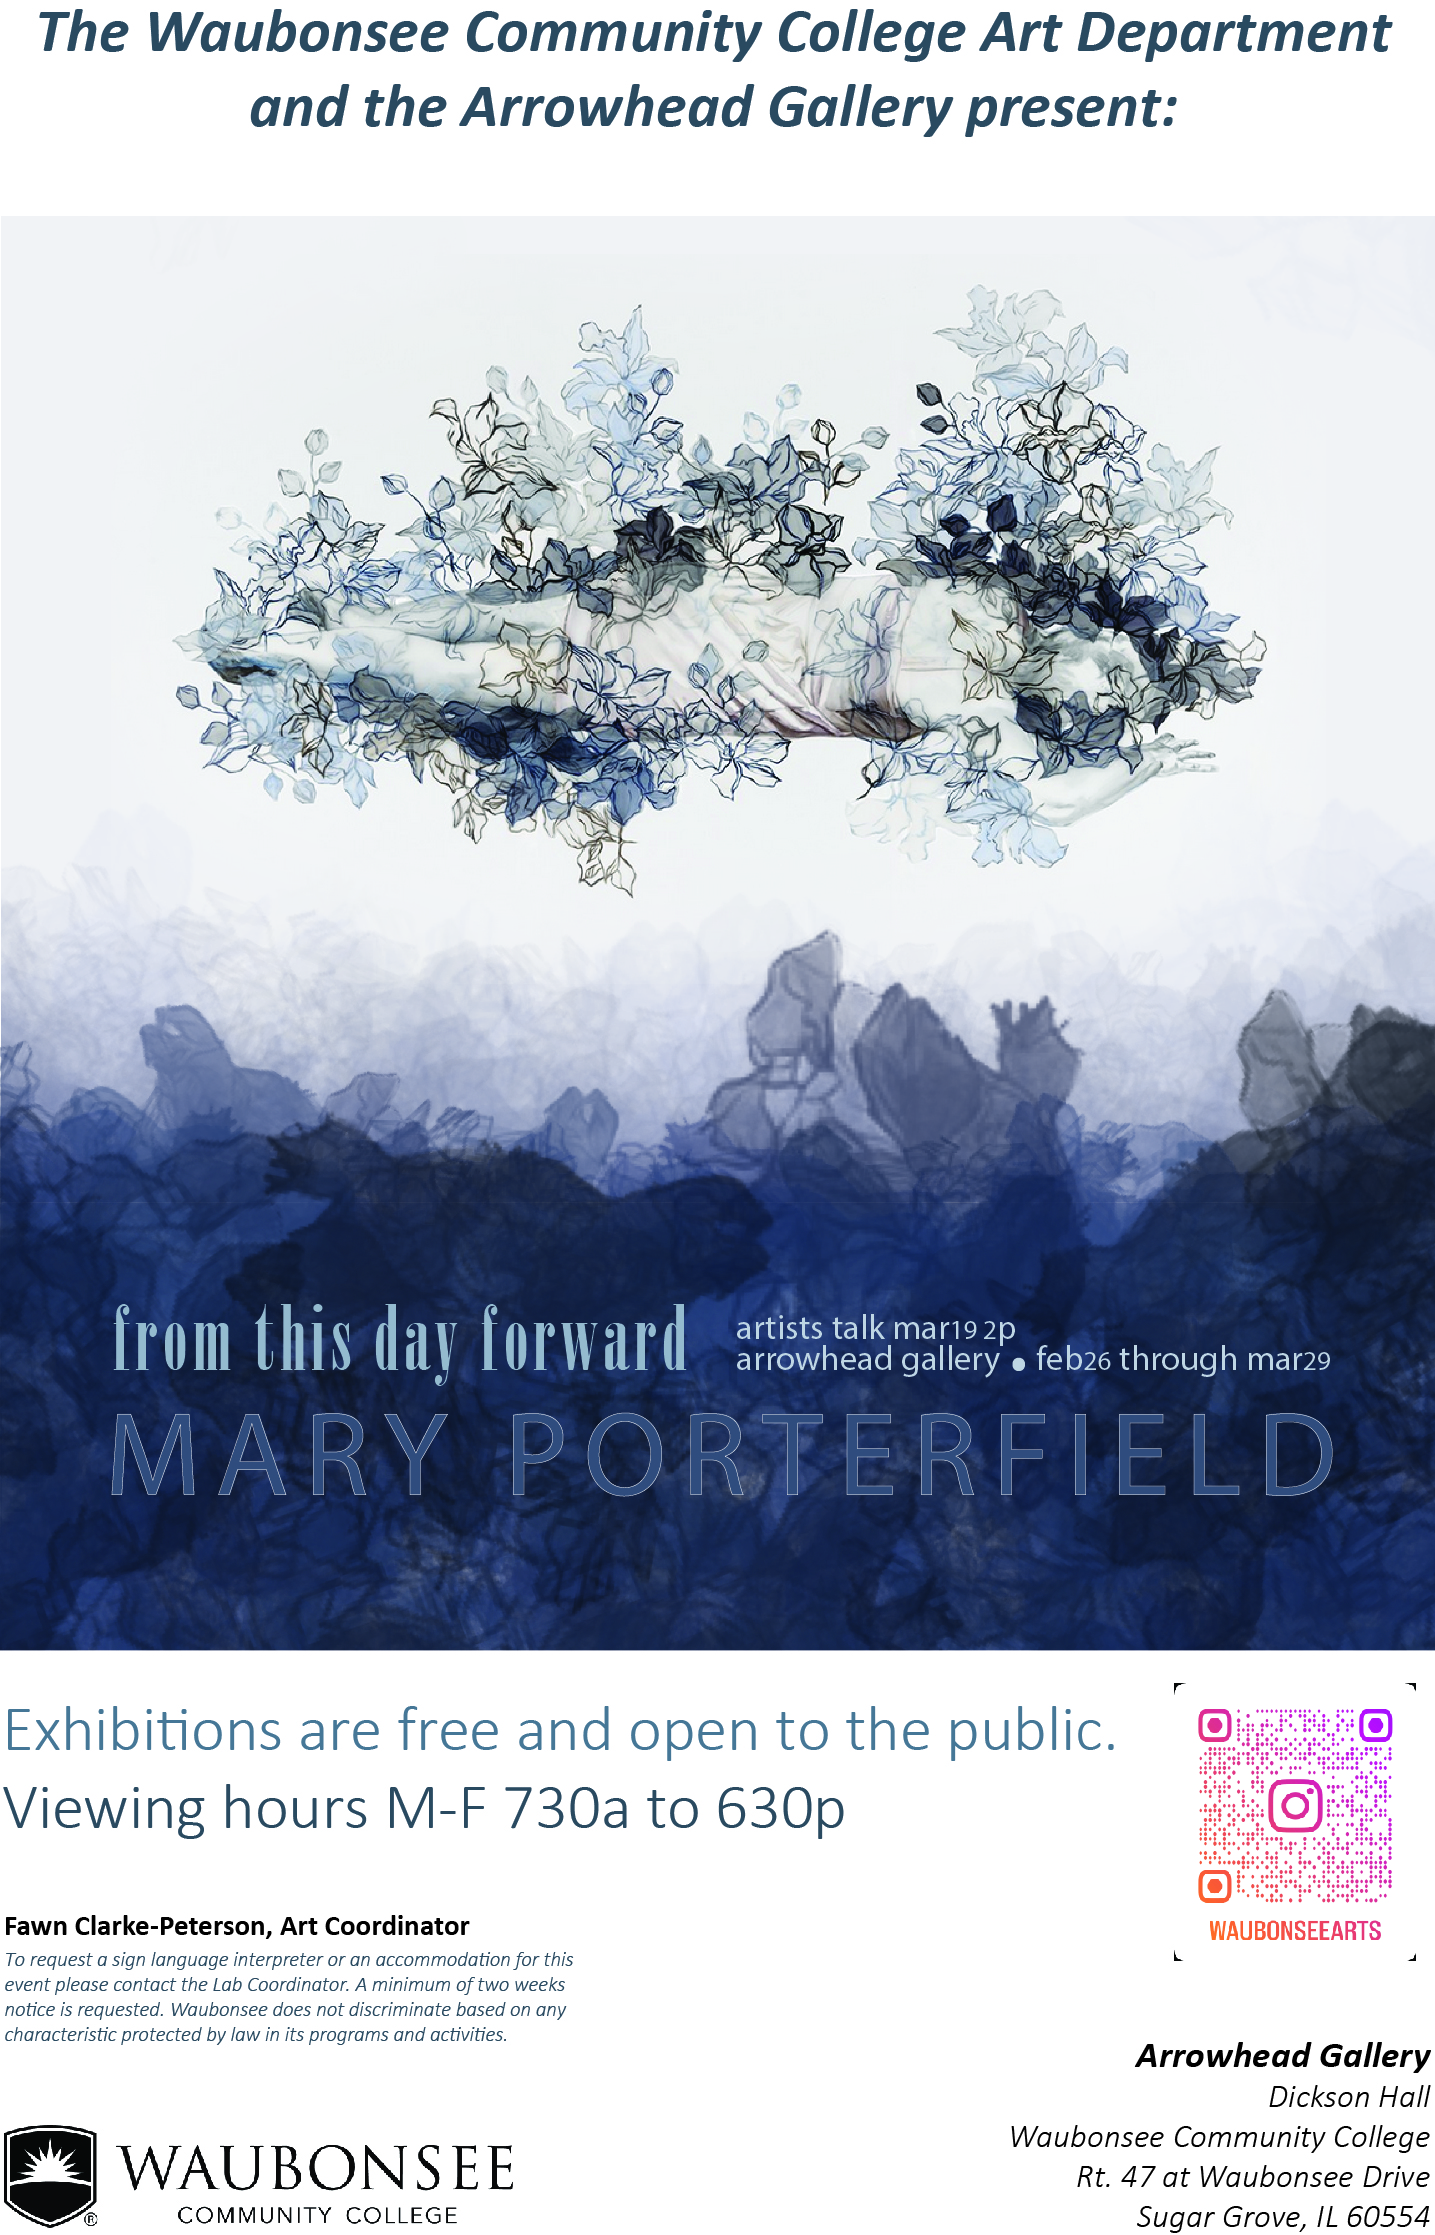 Mary Porterfield Poster Art Exhibition